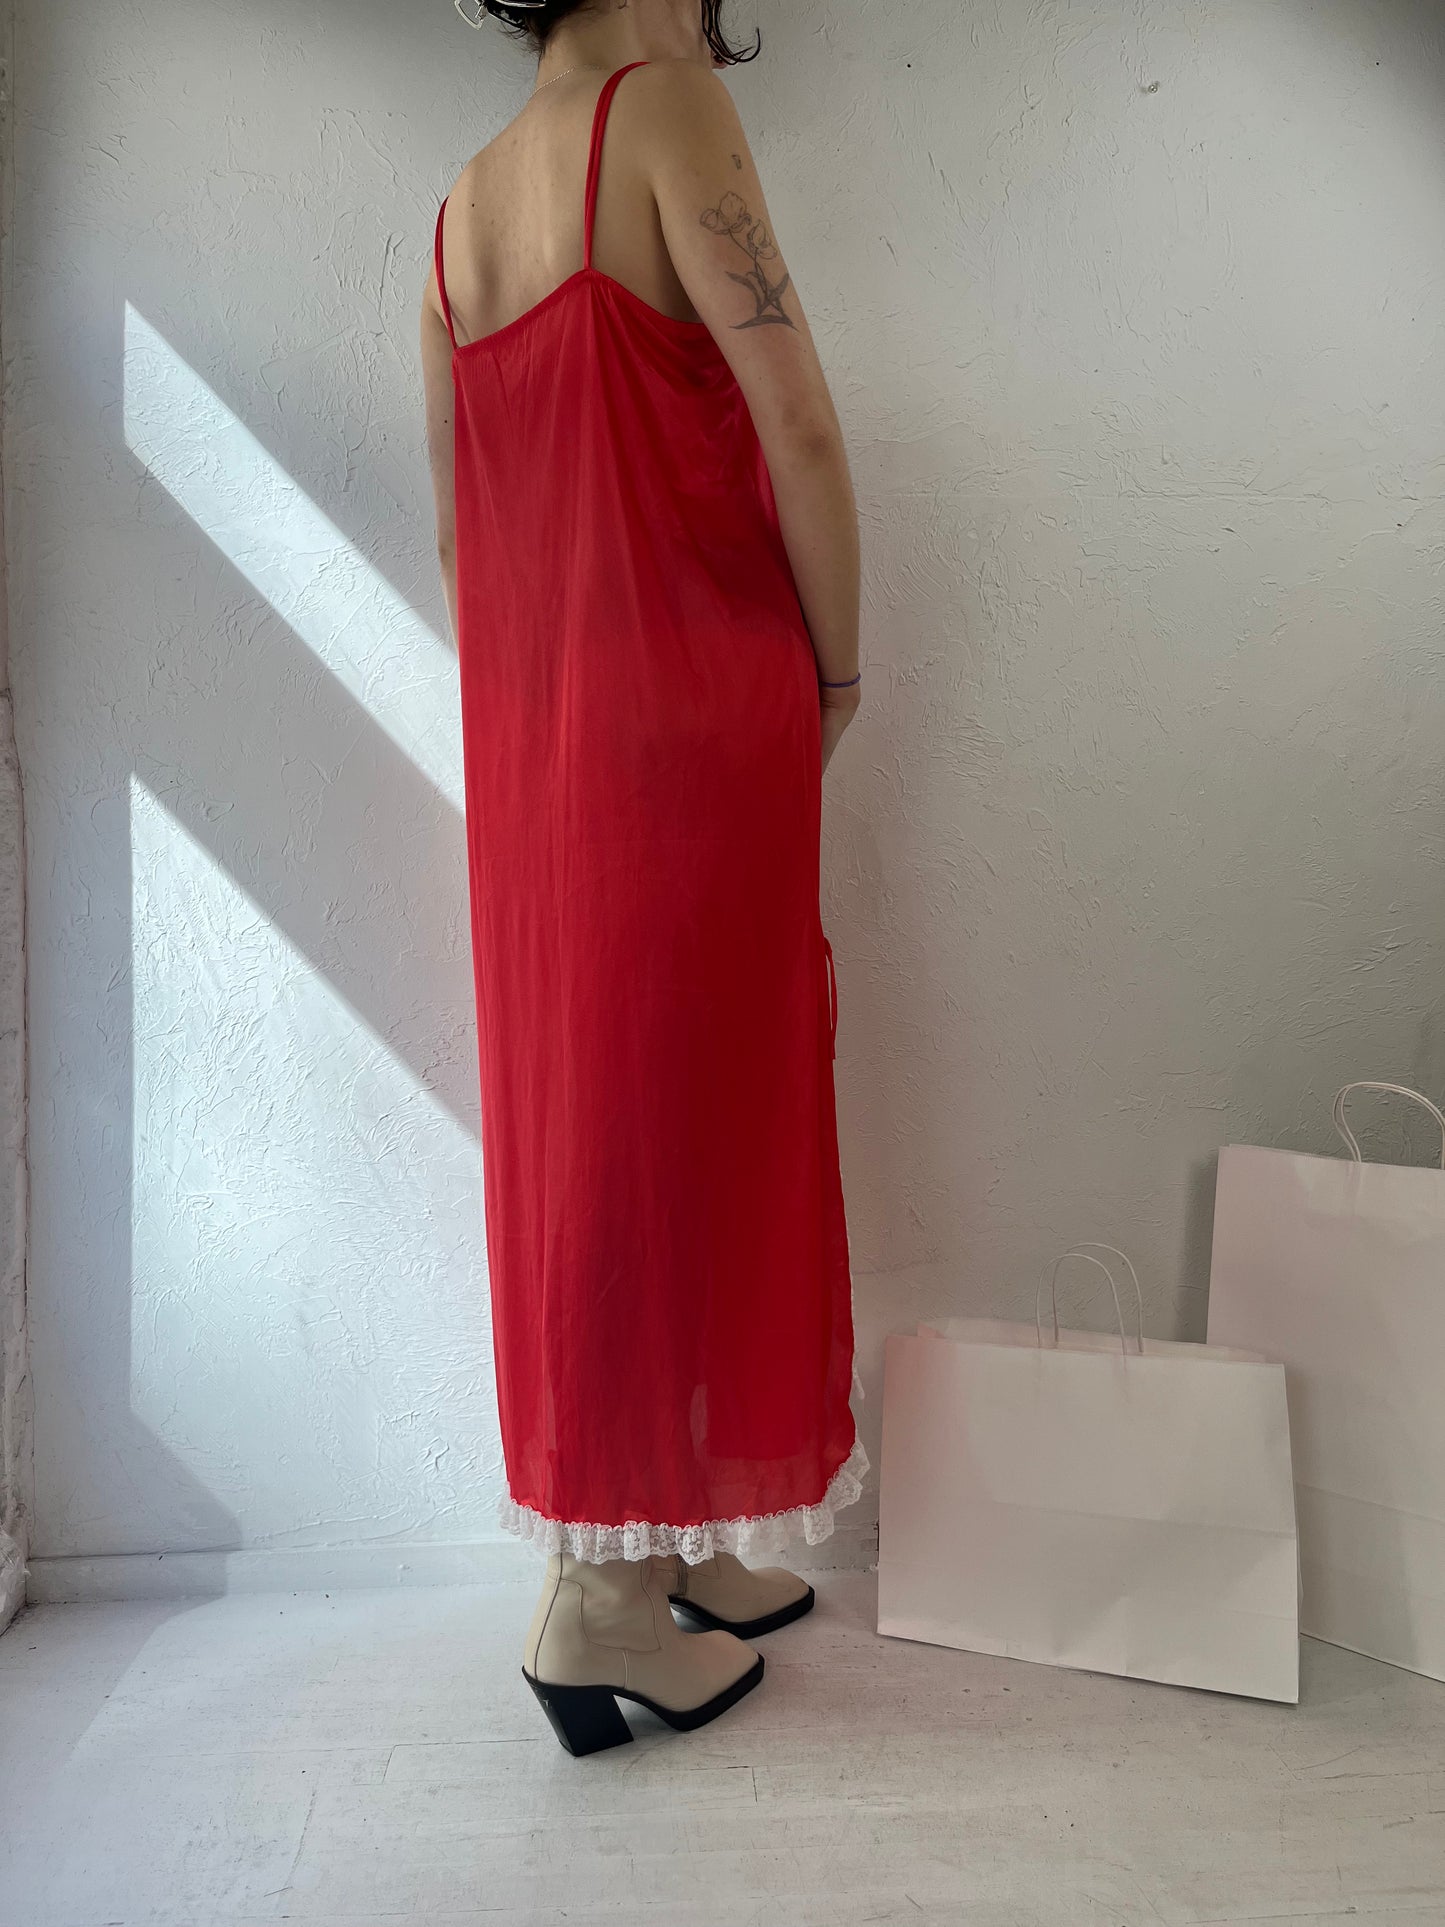 70s Red Nylon Long Slip Dress / Lace Lingerie / Union Made / Small